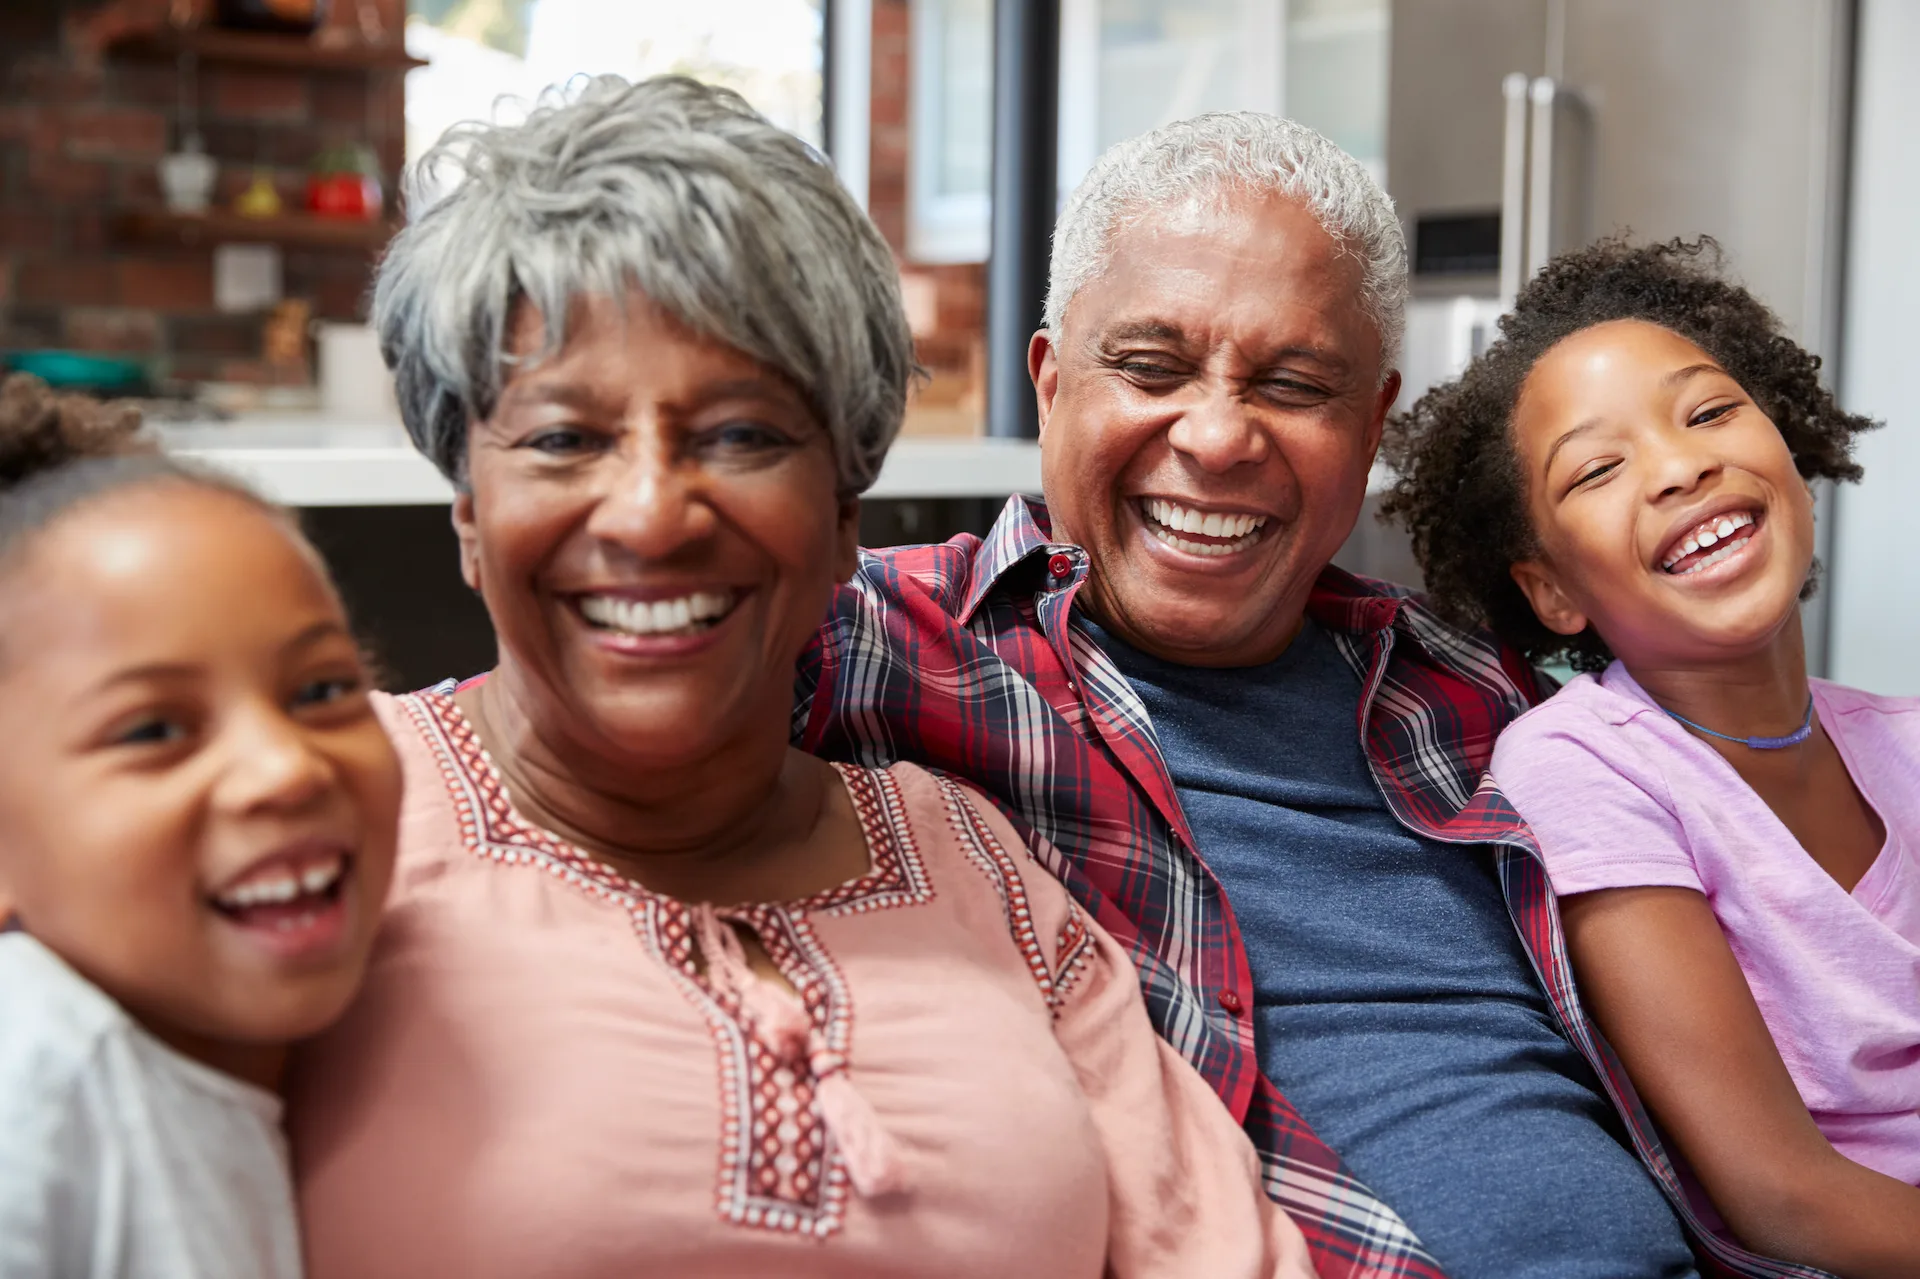 A joyful elderly couple laughing with two young children in a cozy home setting, exemplifying the warmth of dementia care.